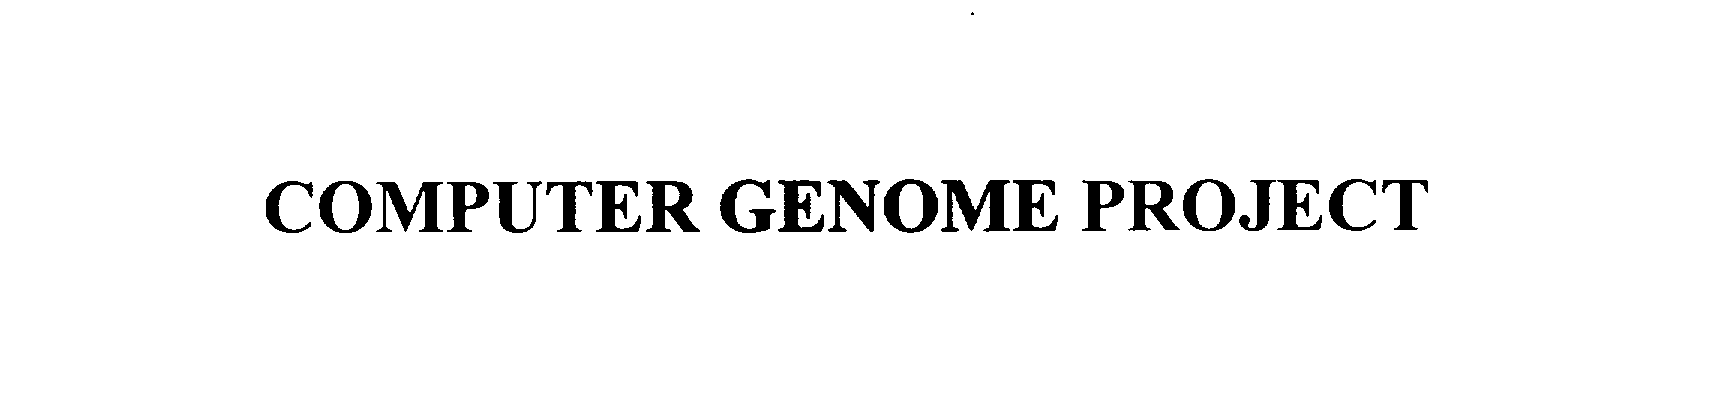  COMPUTER GENOME PROJECT